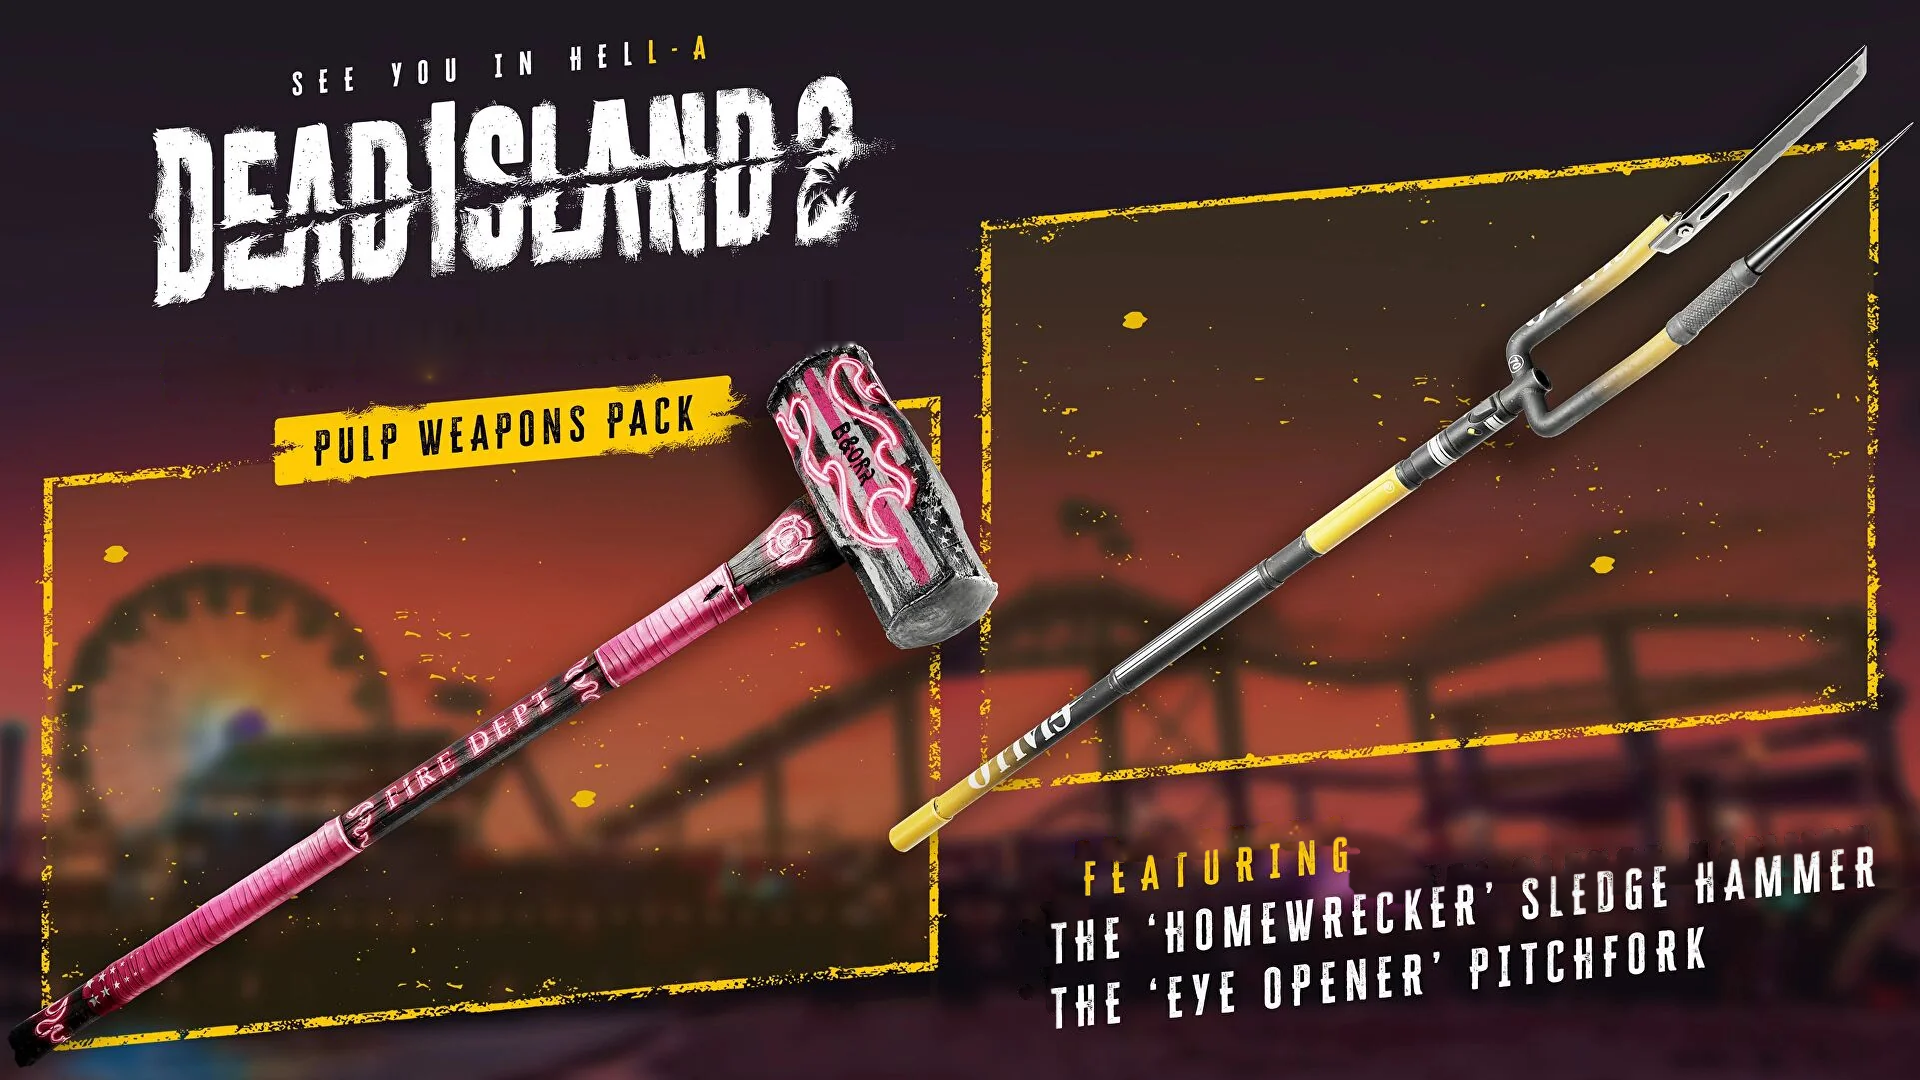 Dead Island 2 - Pulp Weapons Pack DLC US PS5 CD Key 13.55 $